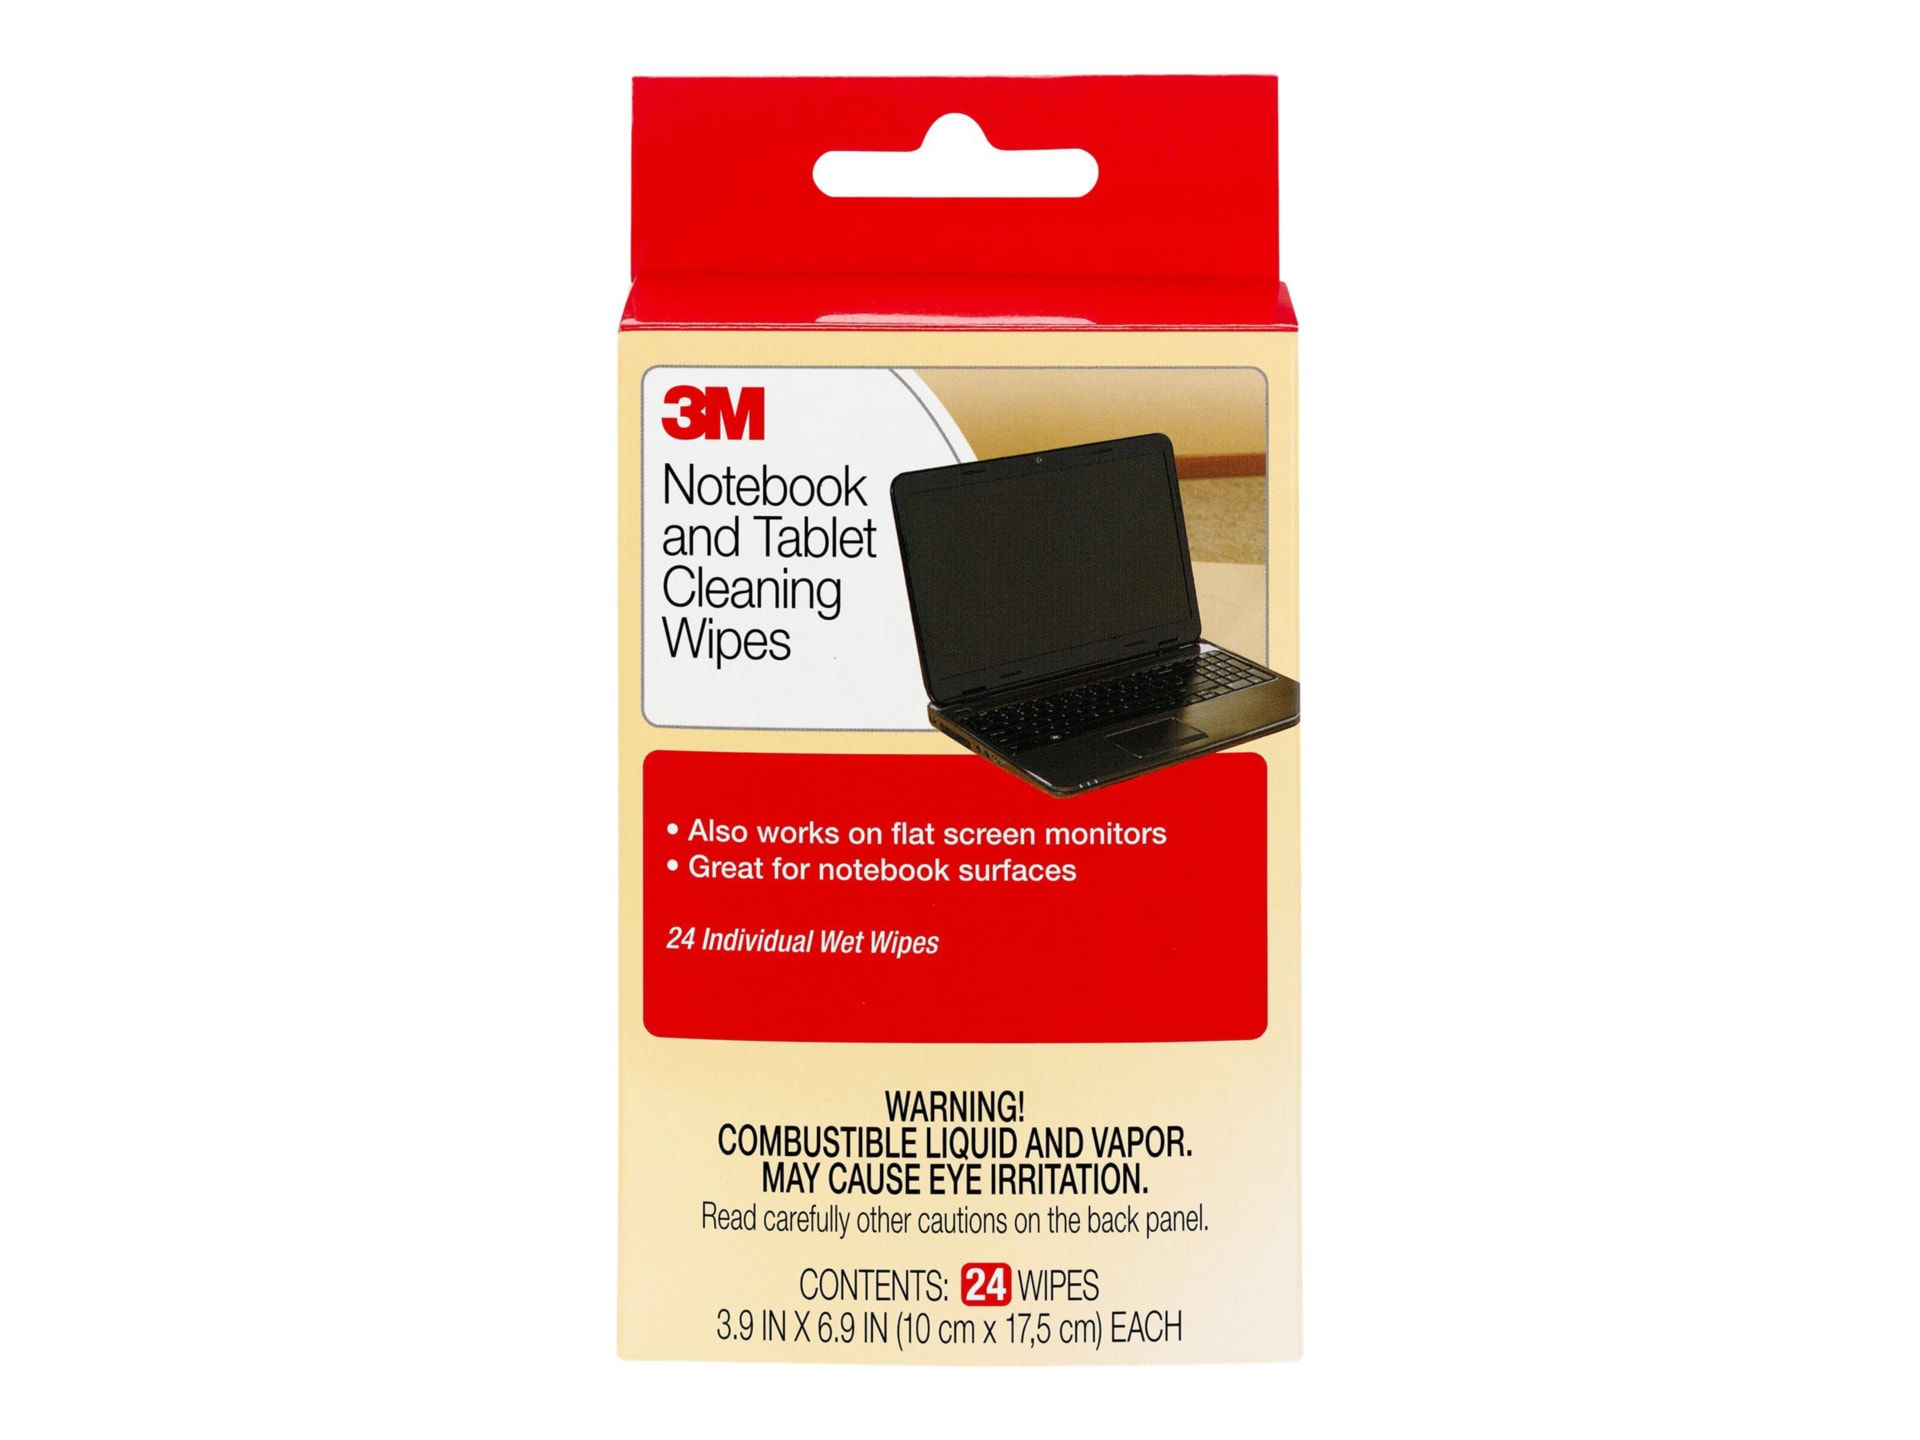 3M Notebook Screen Cleaning Wipes CL630 - cleaning wipes